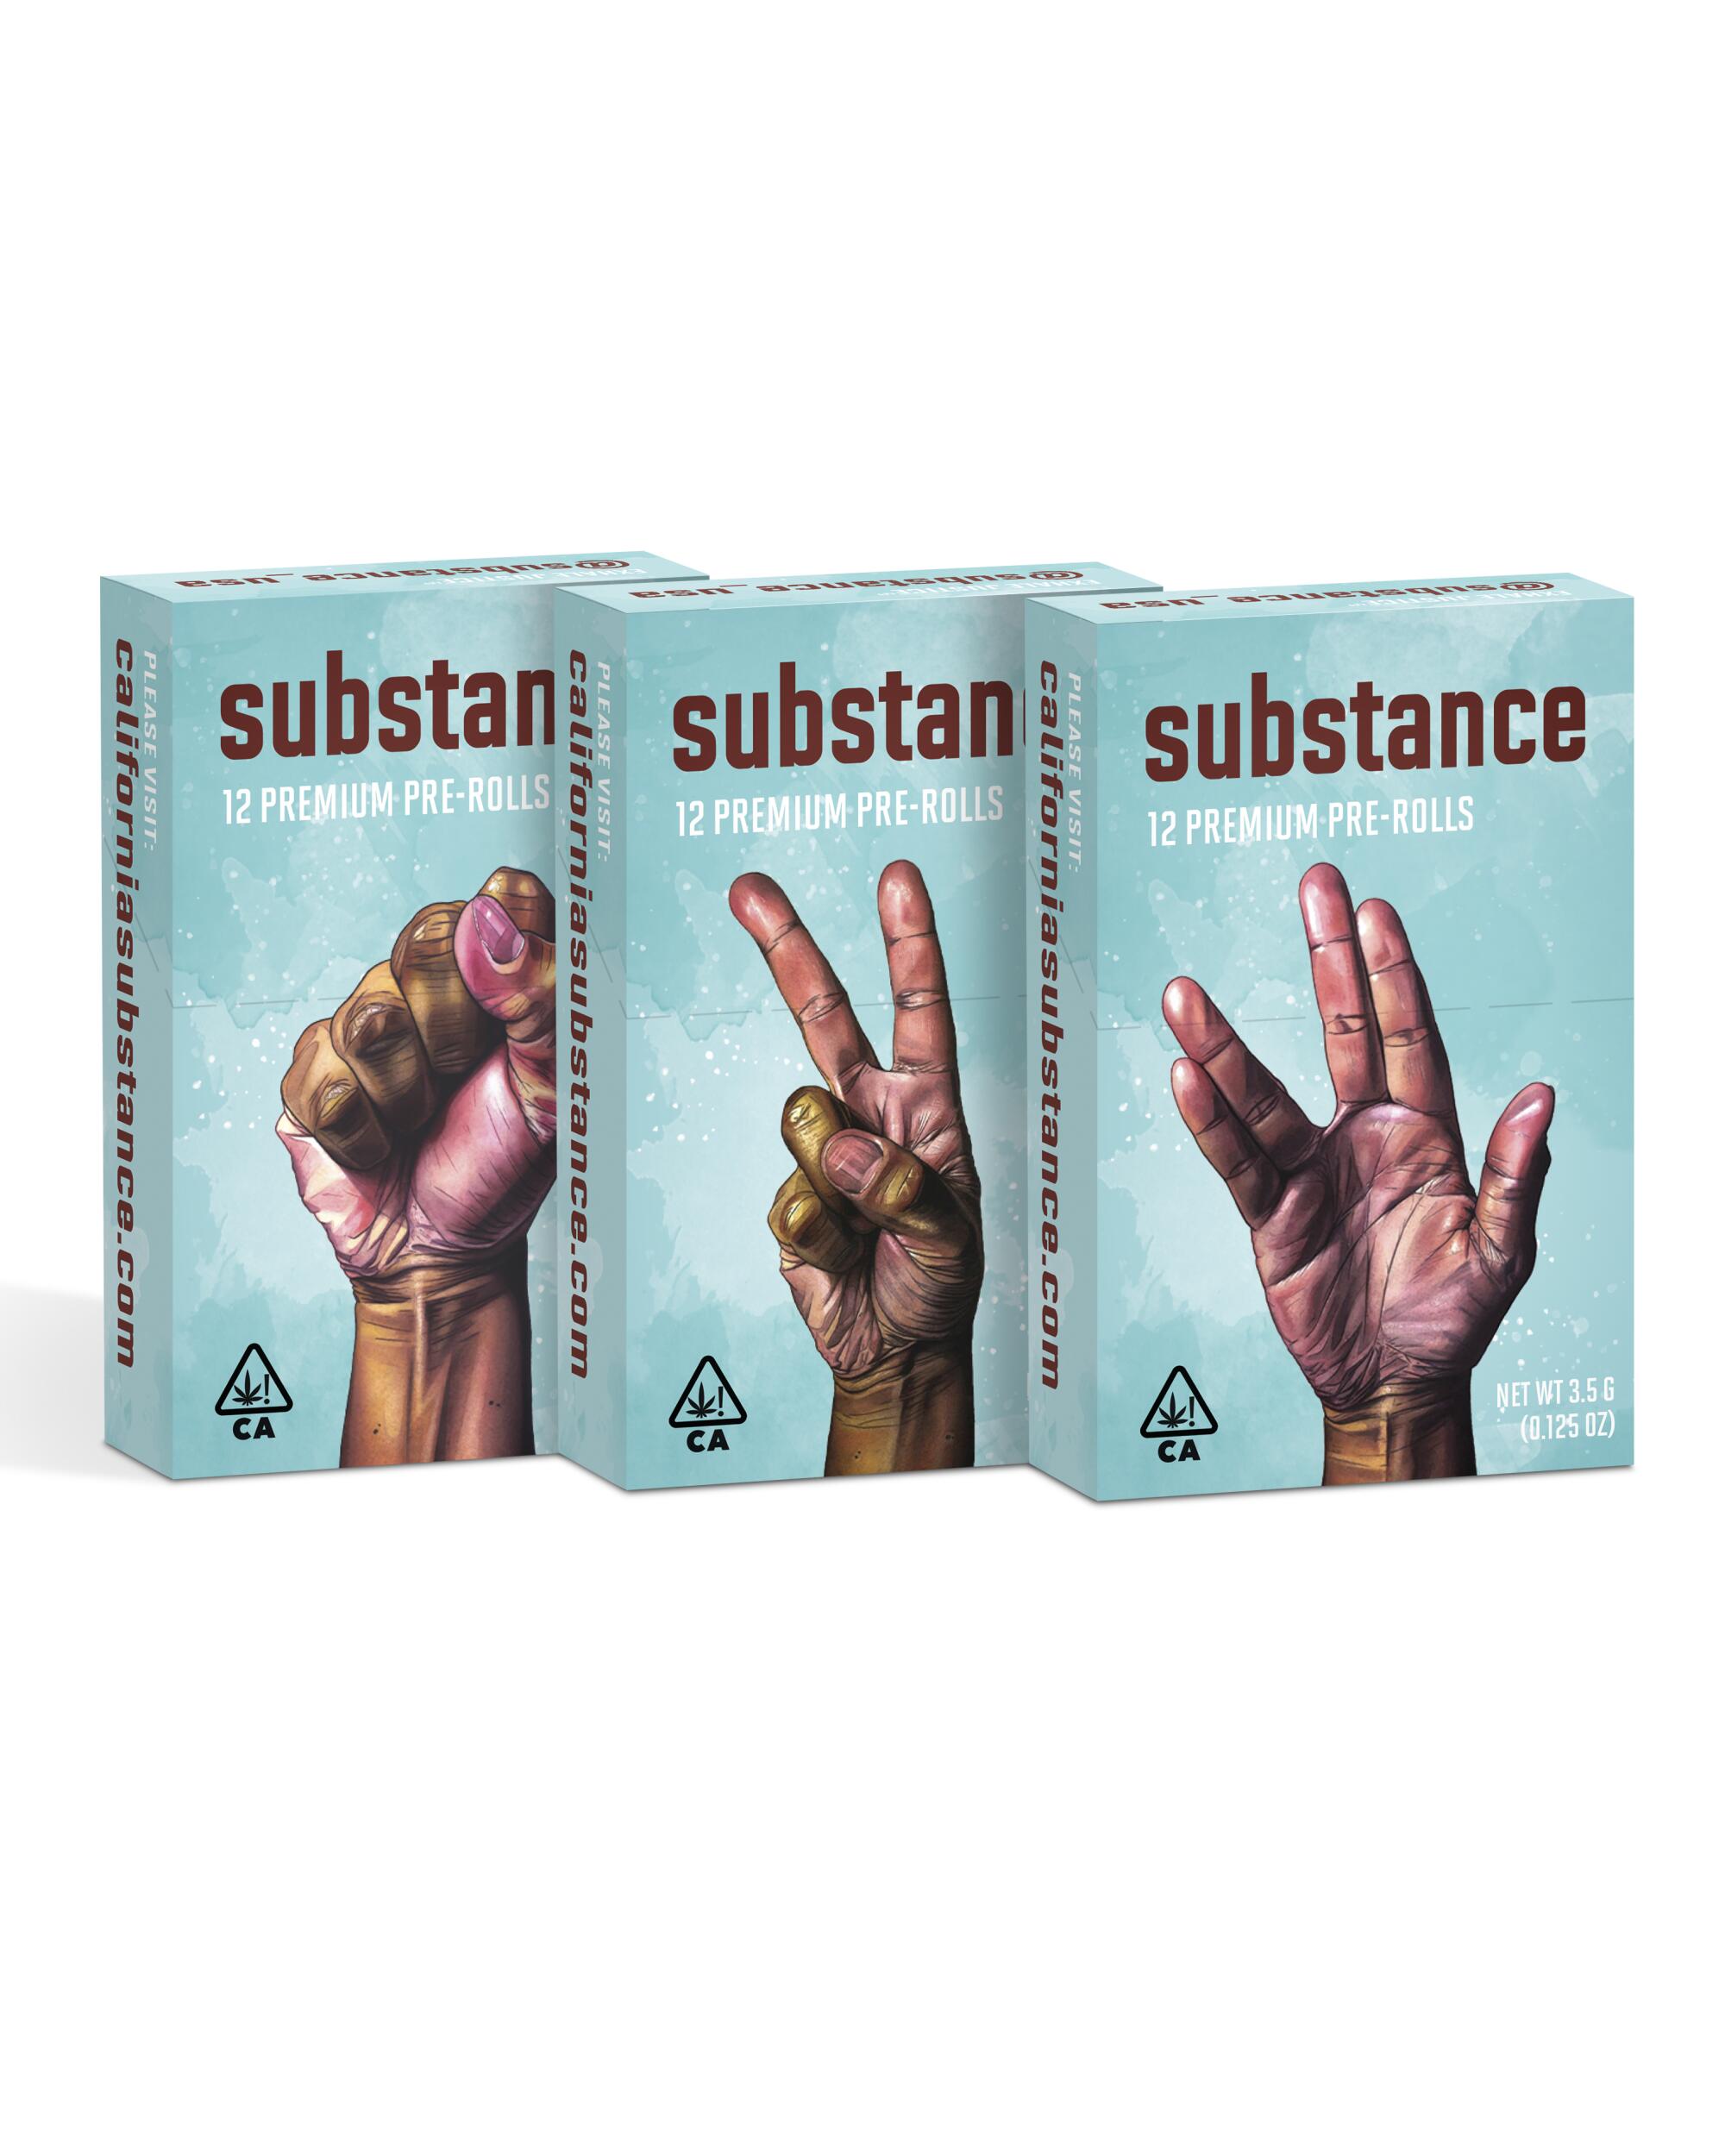 Mini joints by Substance